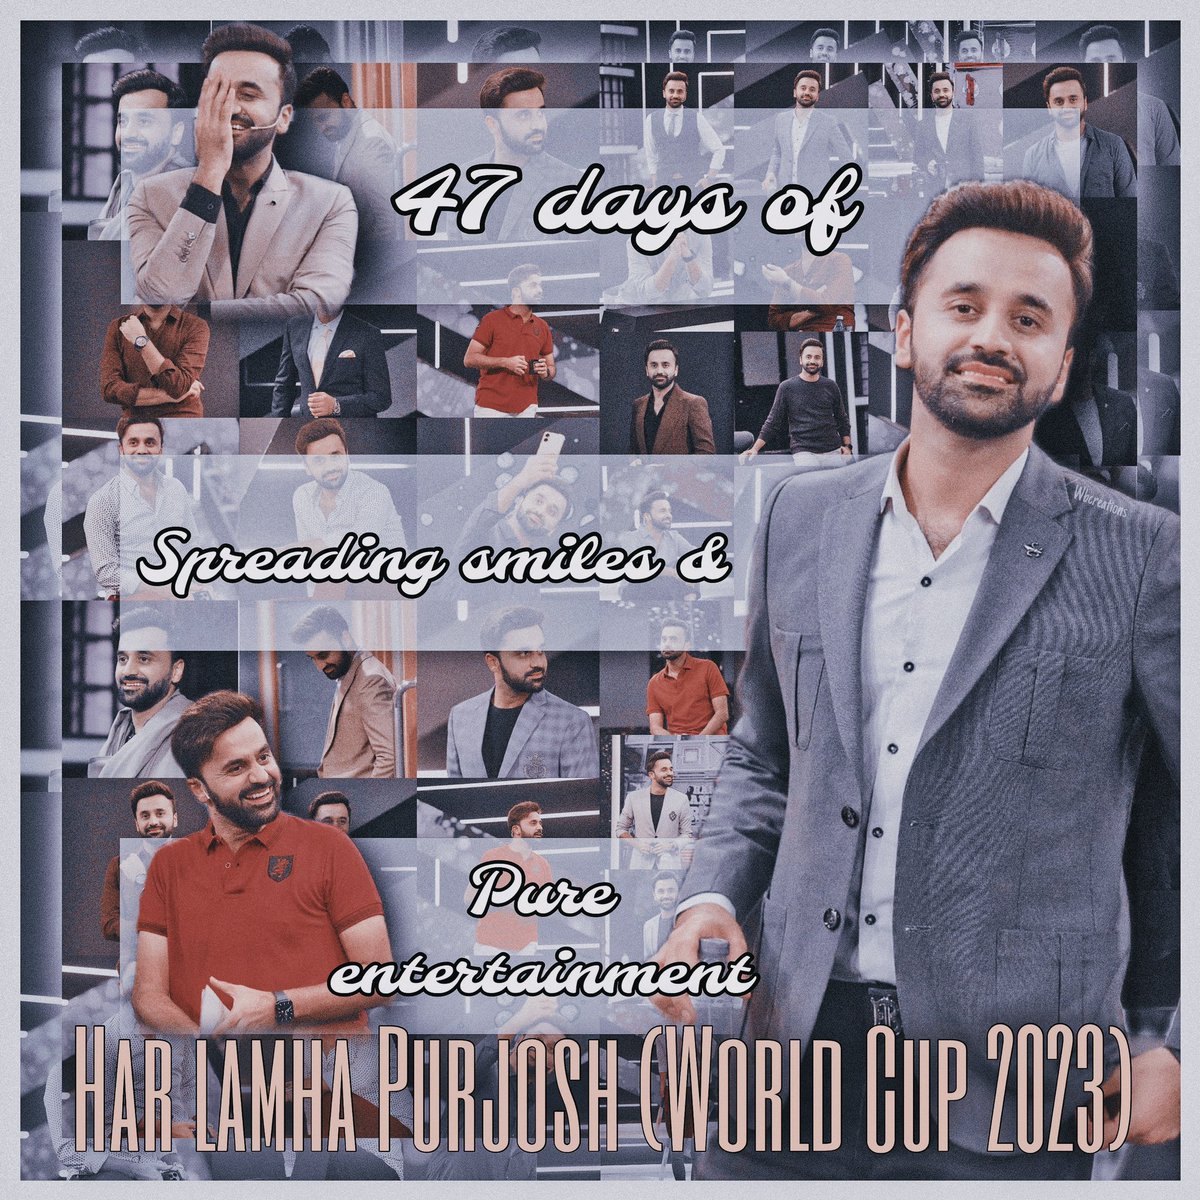 - 47 days of spreading smiles - @WaseemBadami Thanku for entertaining us throughout #HLPJ 💕 Even if Pakistan couldn’t make it well in the tournament..ur show still managed to make us happy! Thank you for making our Har lamha Purjosh throughout #WorldCup ❣️